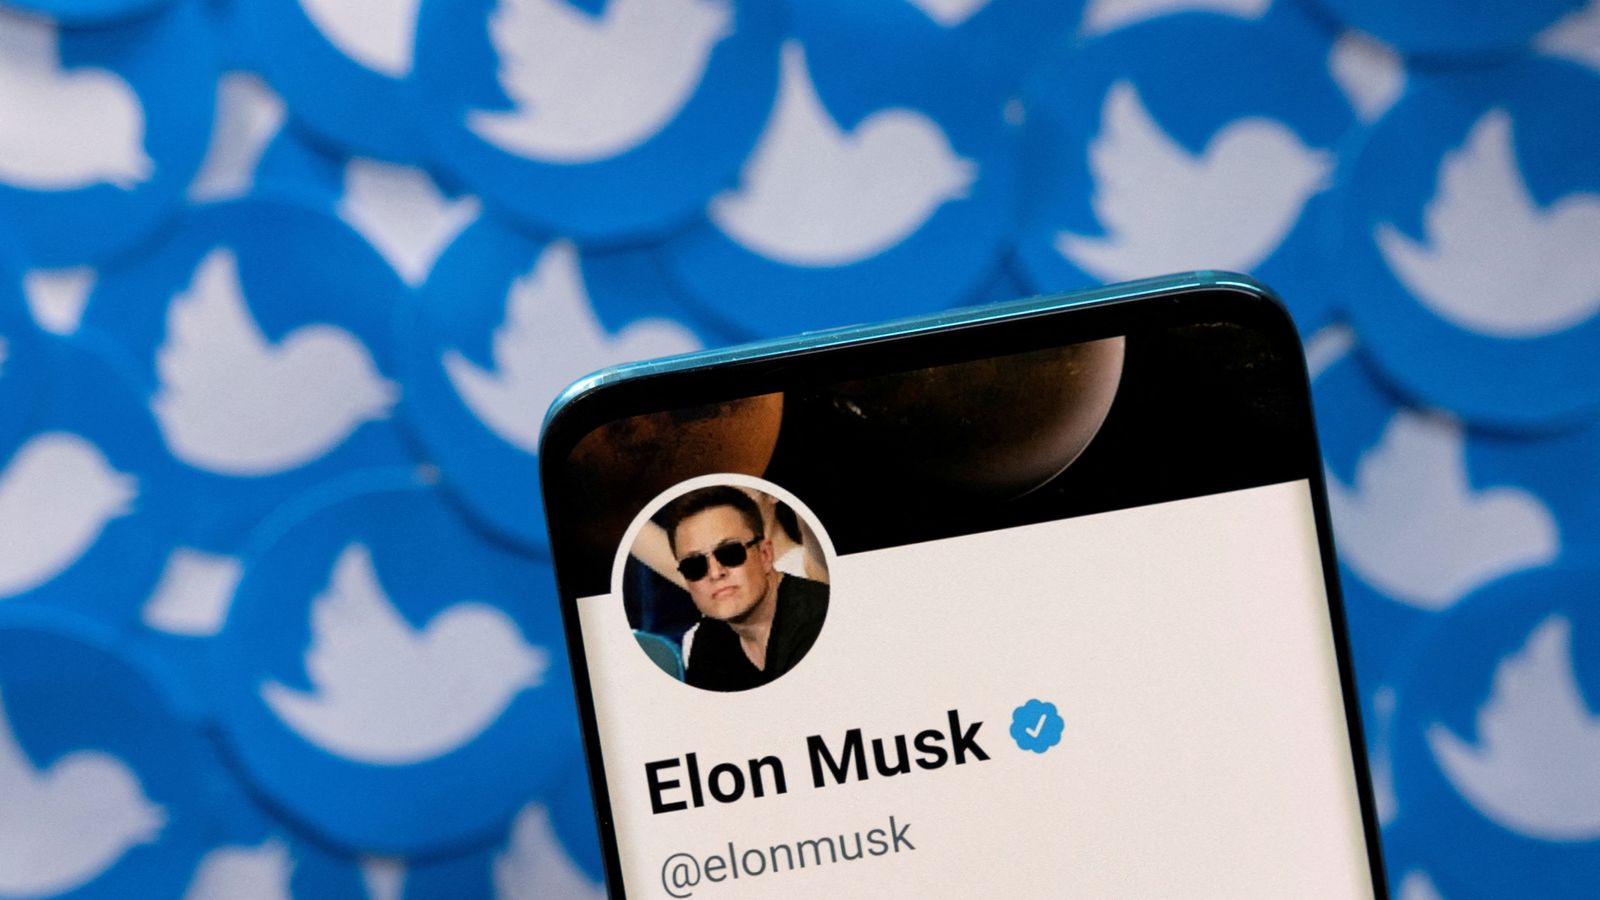 Twitter is not safer under Elon Musk – and he has made ‘alarming changes’ to site, former exec warns